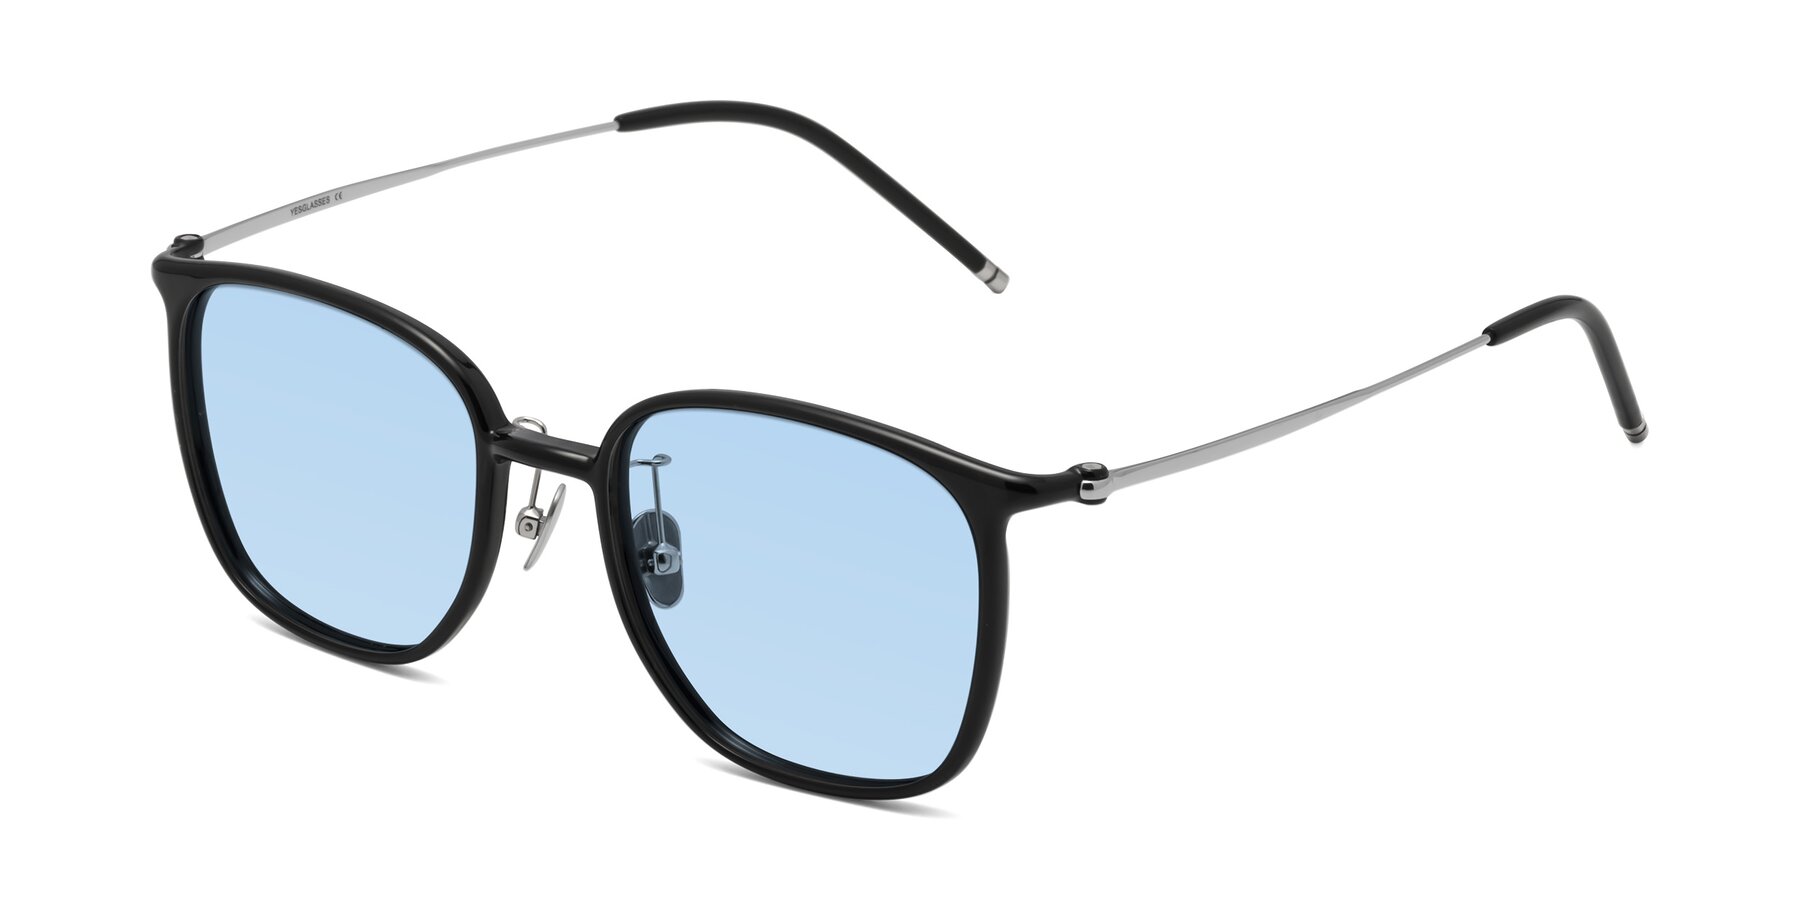 Angle of Manlius in Black with Light Blue Tinted Lenses